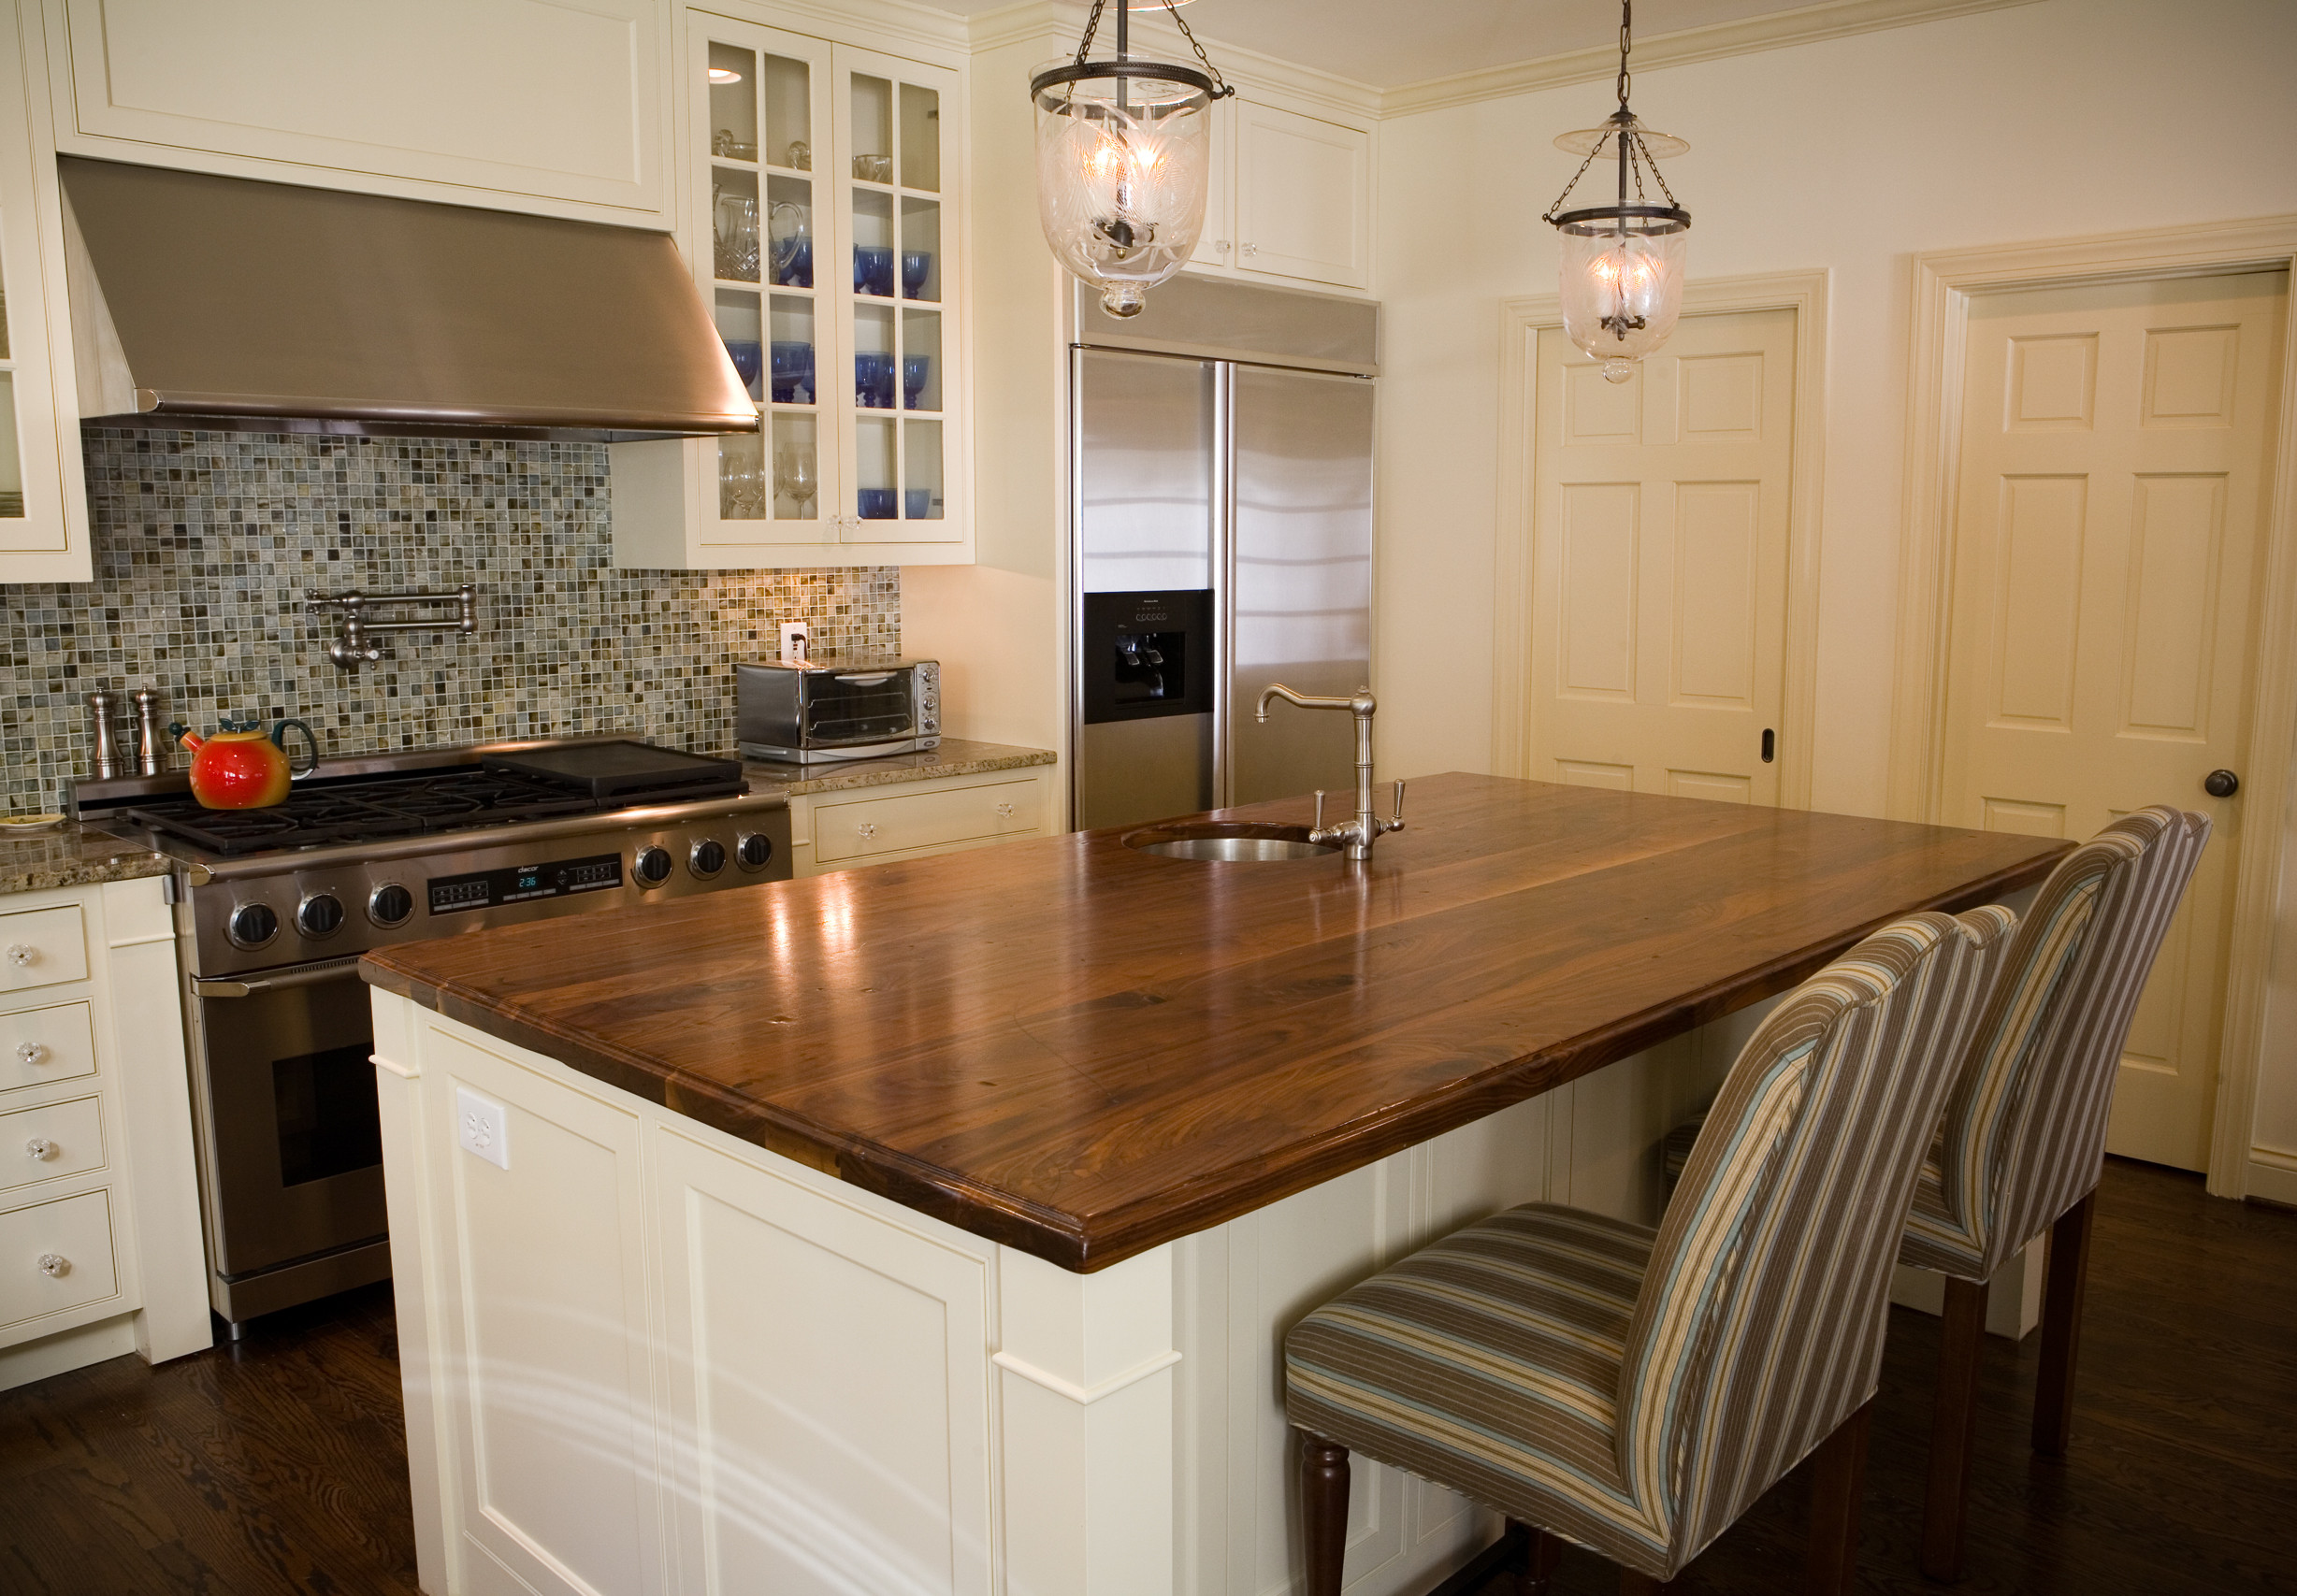 Kitchen Counter Top Ideas
 All About Wood Kitchen Countertops You Have to Know